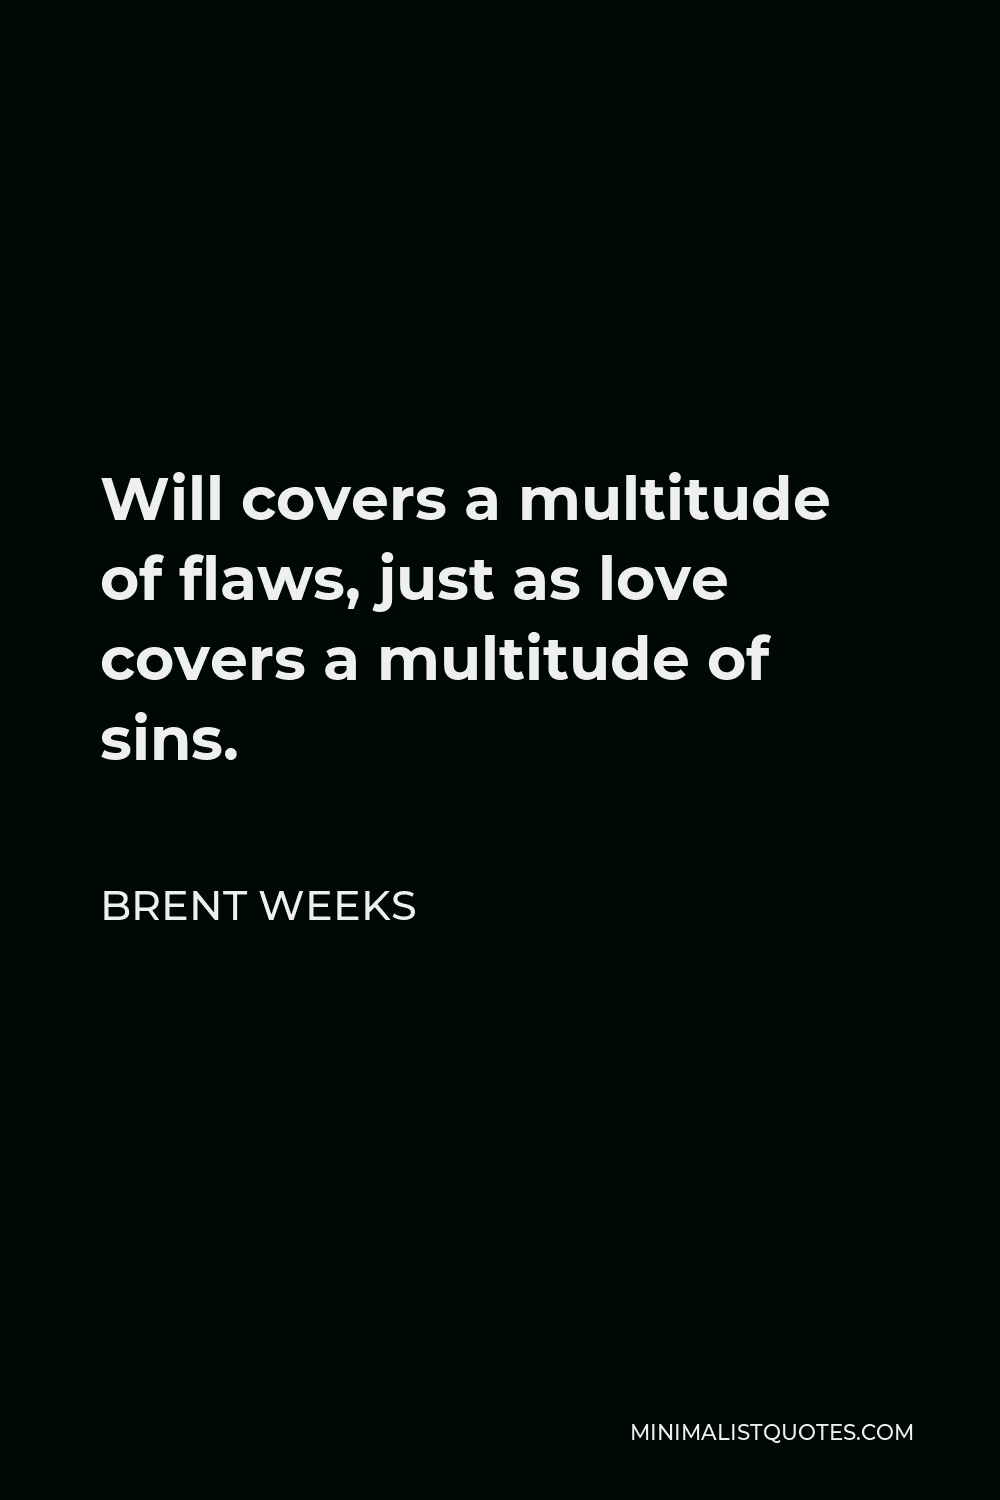 Brent Weeks Quote - Will covers a multitude of flaws, just as love covers a multitude of sins.